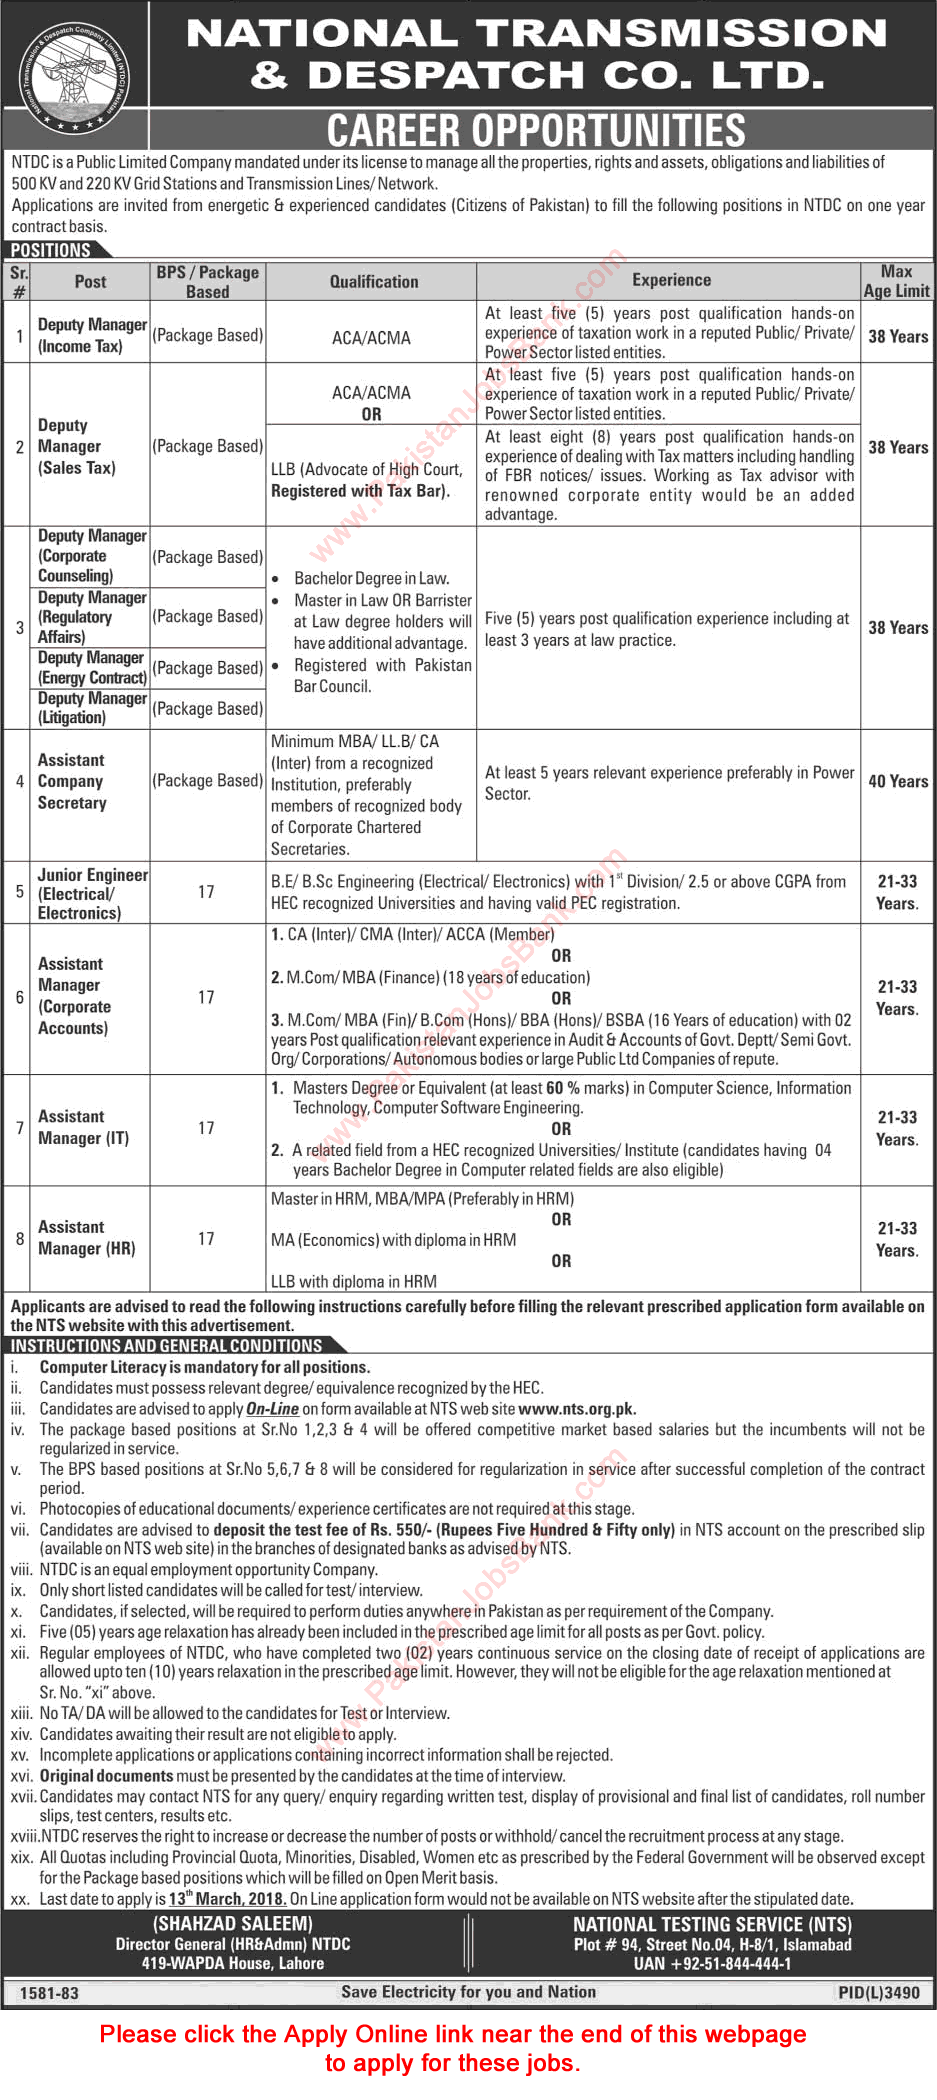 NTDC Jobs 2018 February WAPDA NTS Online Application Form Junior Engineers, Assistant Managers & Others Latest